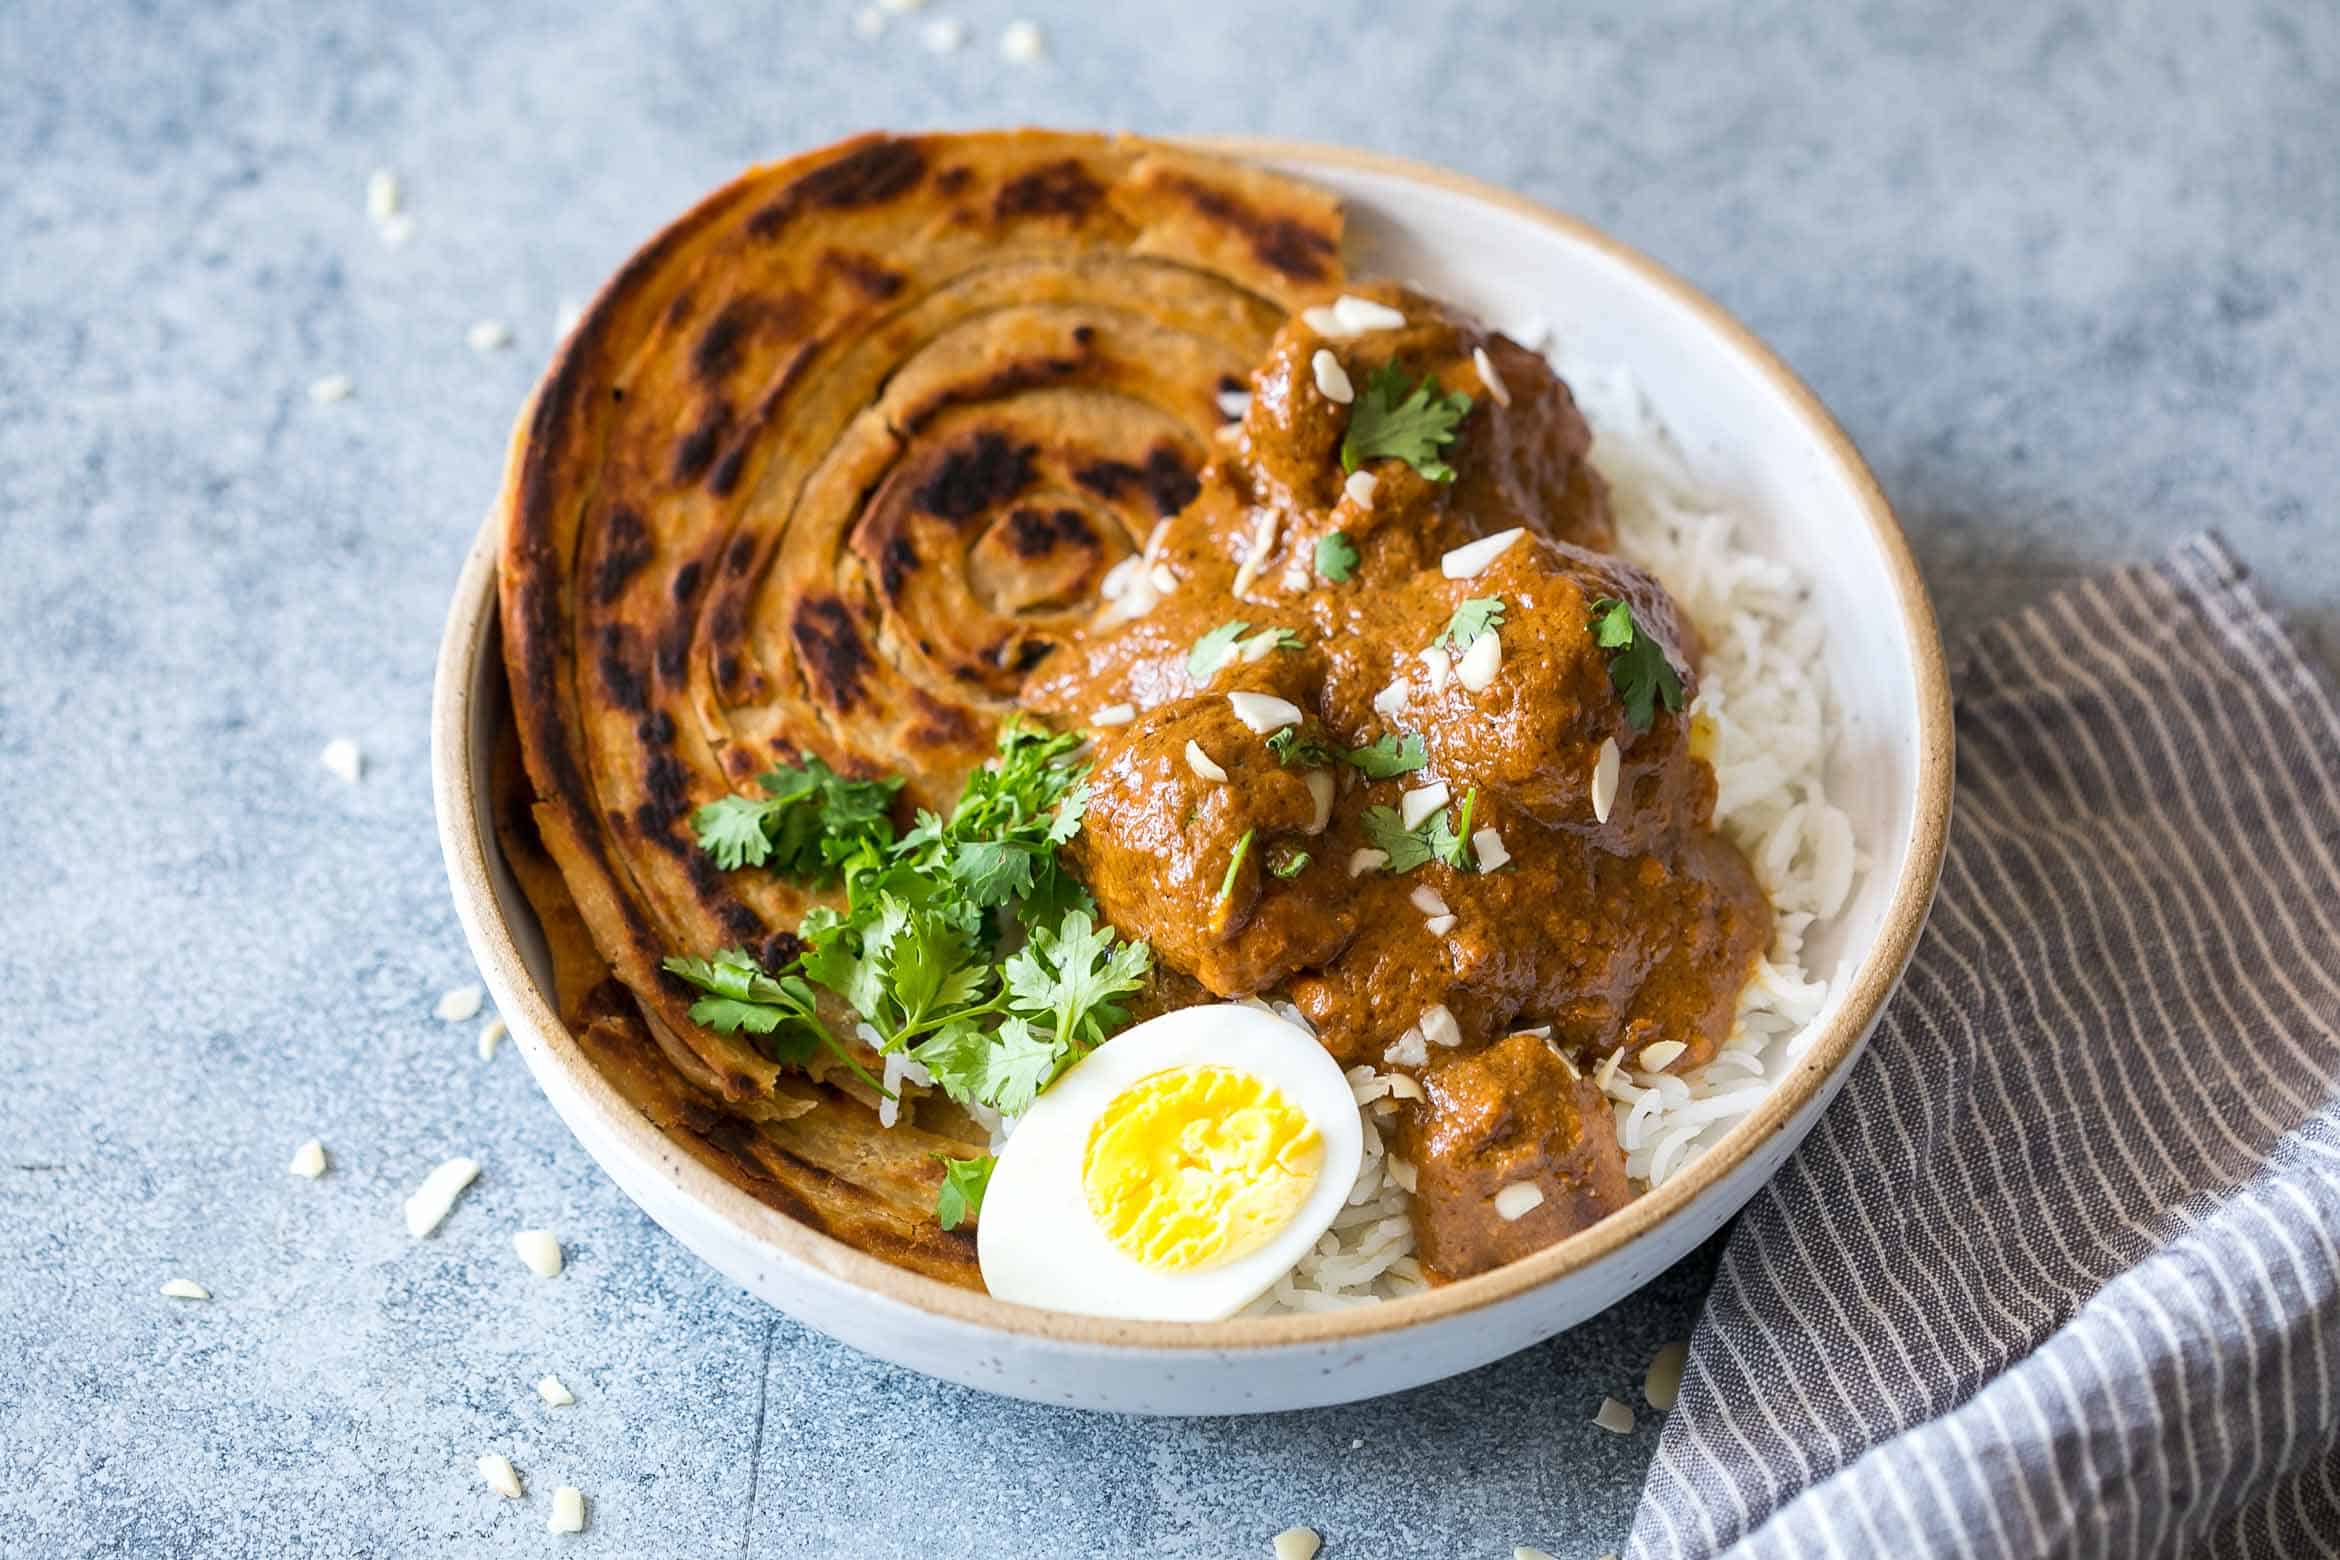 Mughlai Chicken is a restaurant style, north Indian recipe with a creamy, dark brown onion gravy that will have you licking the plate! Serve it with parathas, biryani or jeera rice, and feel free to substitute paneer if you are vegetarian.